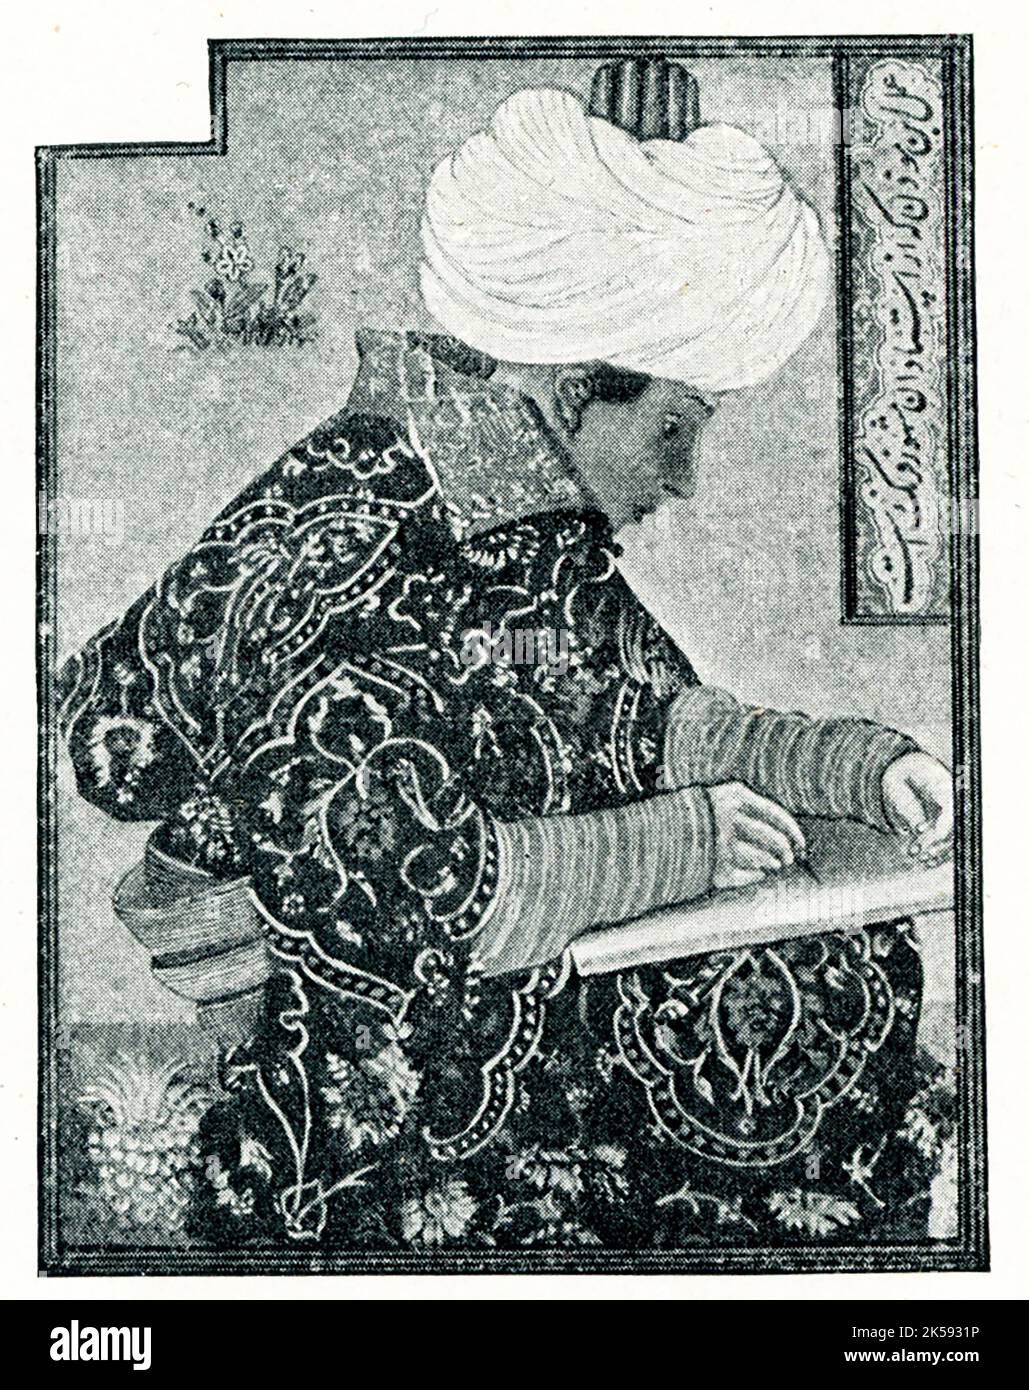 This 1910 image shows a Turkish scribe. It is a miniature by Gentile Bellini. The original is in Constantinople (present-day istanbul). Gentile Bellini (born c. 1429-1507) was an Italian painter and  member of the founding family of the Venetian school of Renaissance painting, best known for his portraiture and his scenes of Venice. Stock Photo